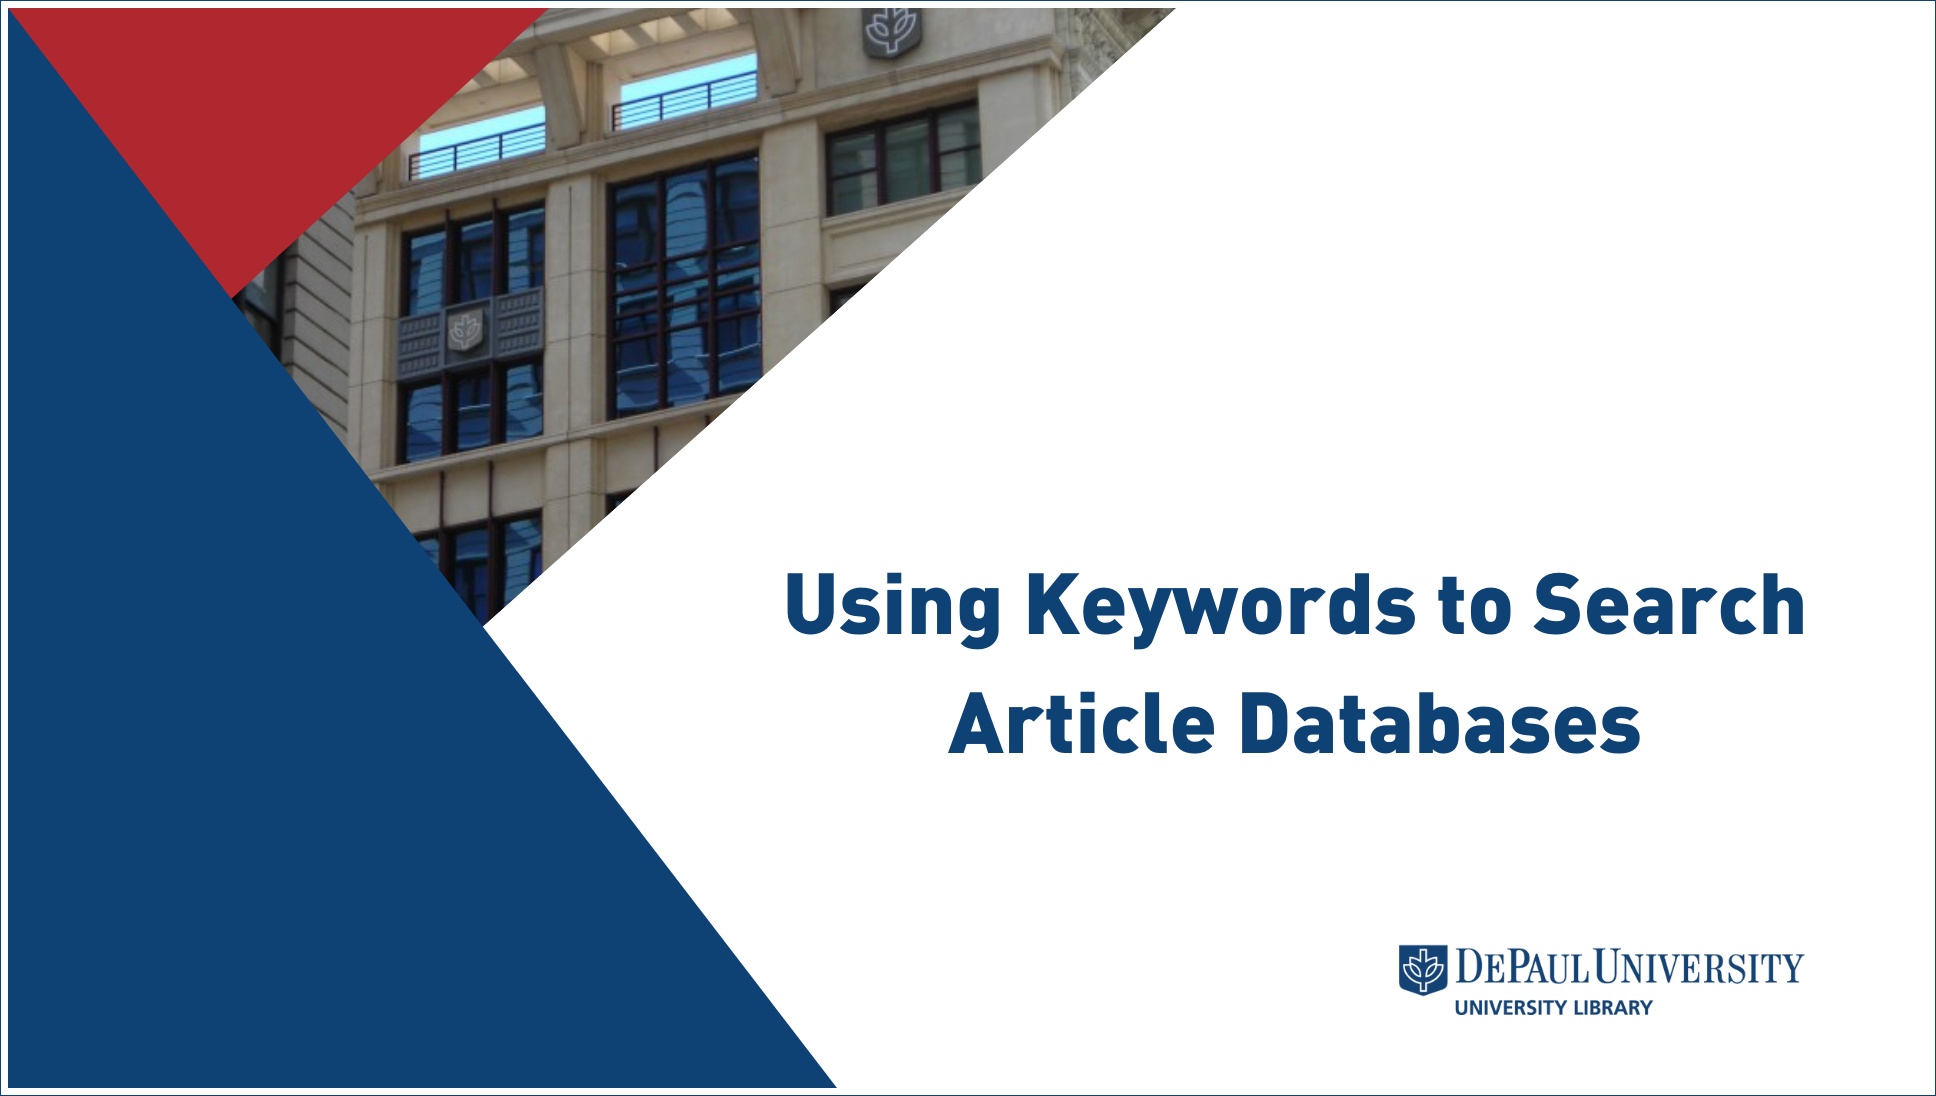 Using Keywords to Search Article Databases